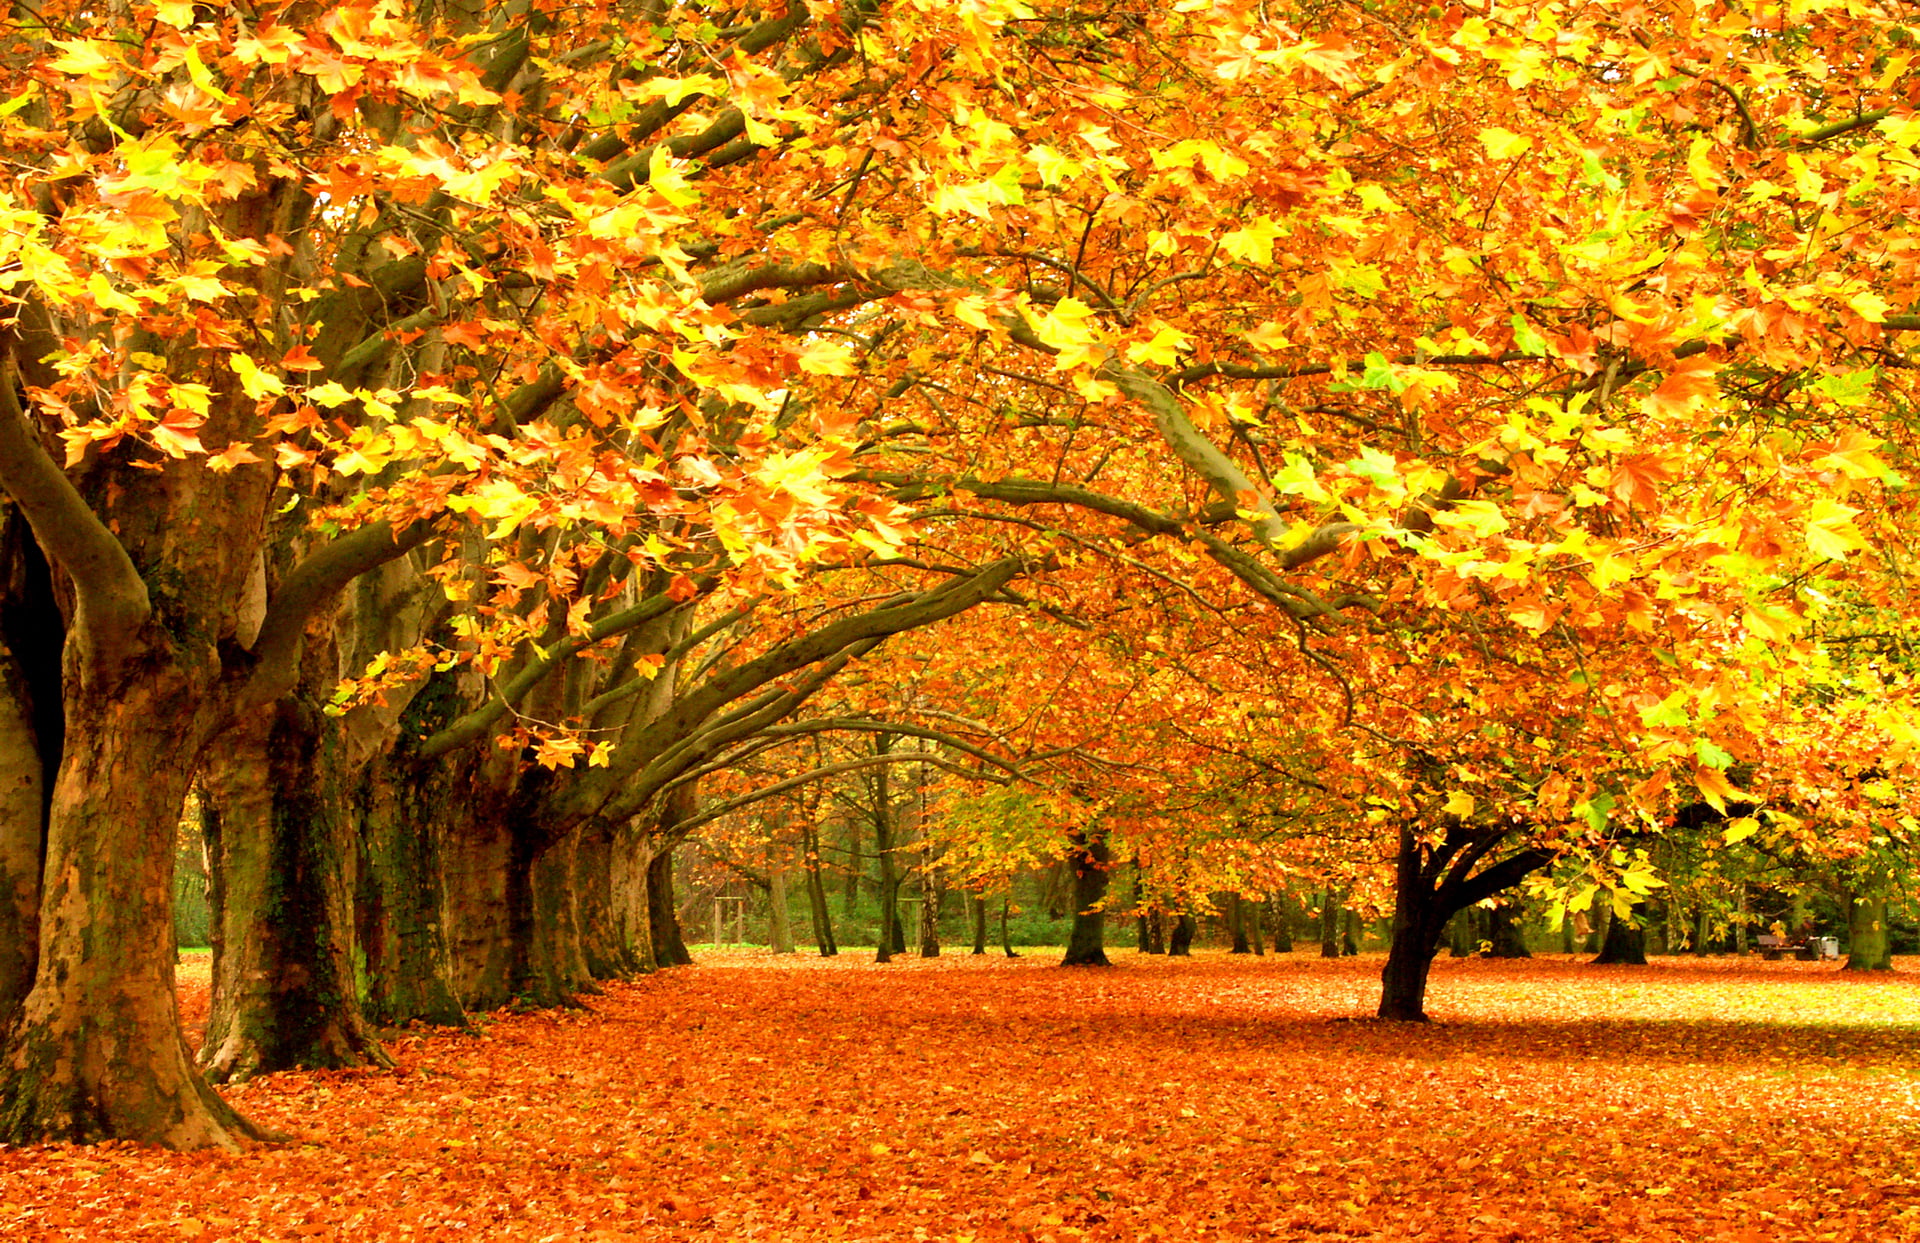 brown trees, leaves, Park, foliage, falling leaves, forest trees